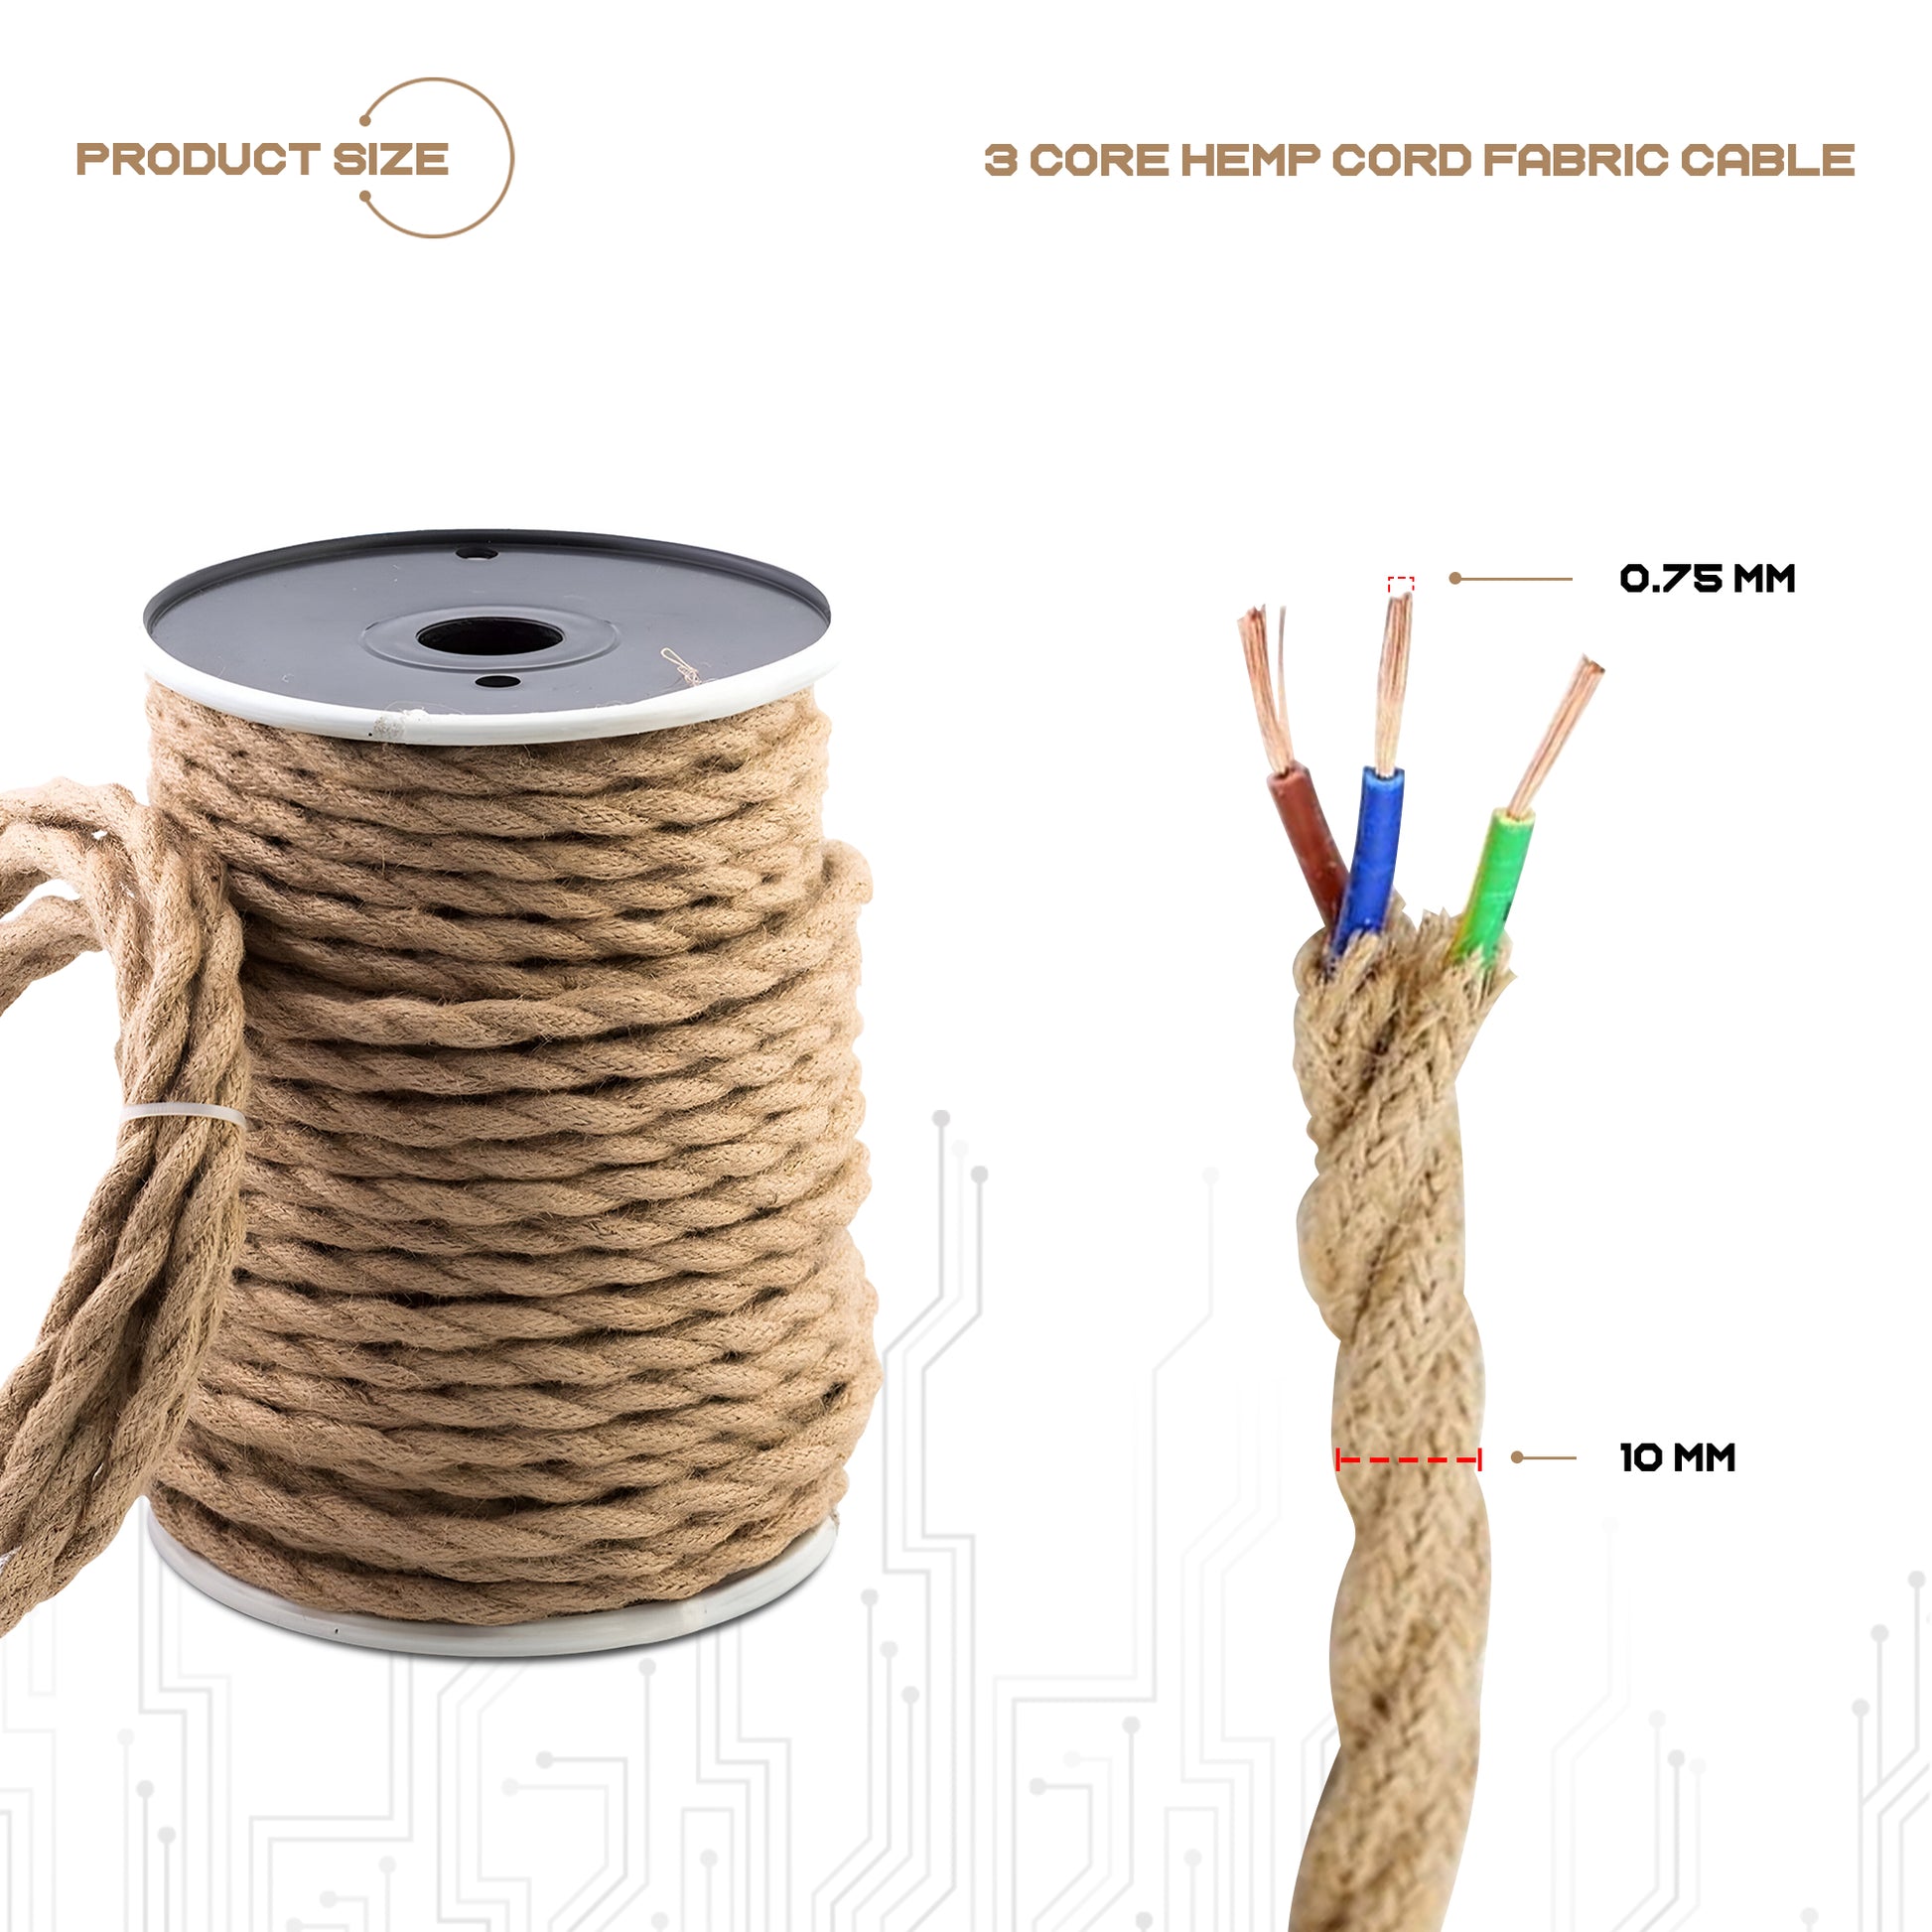 3 core hemp rope fabric cable - size image